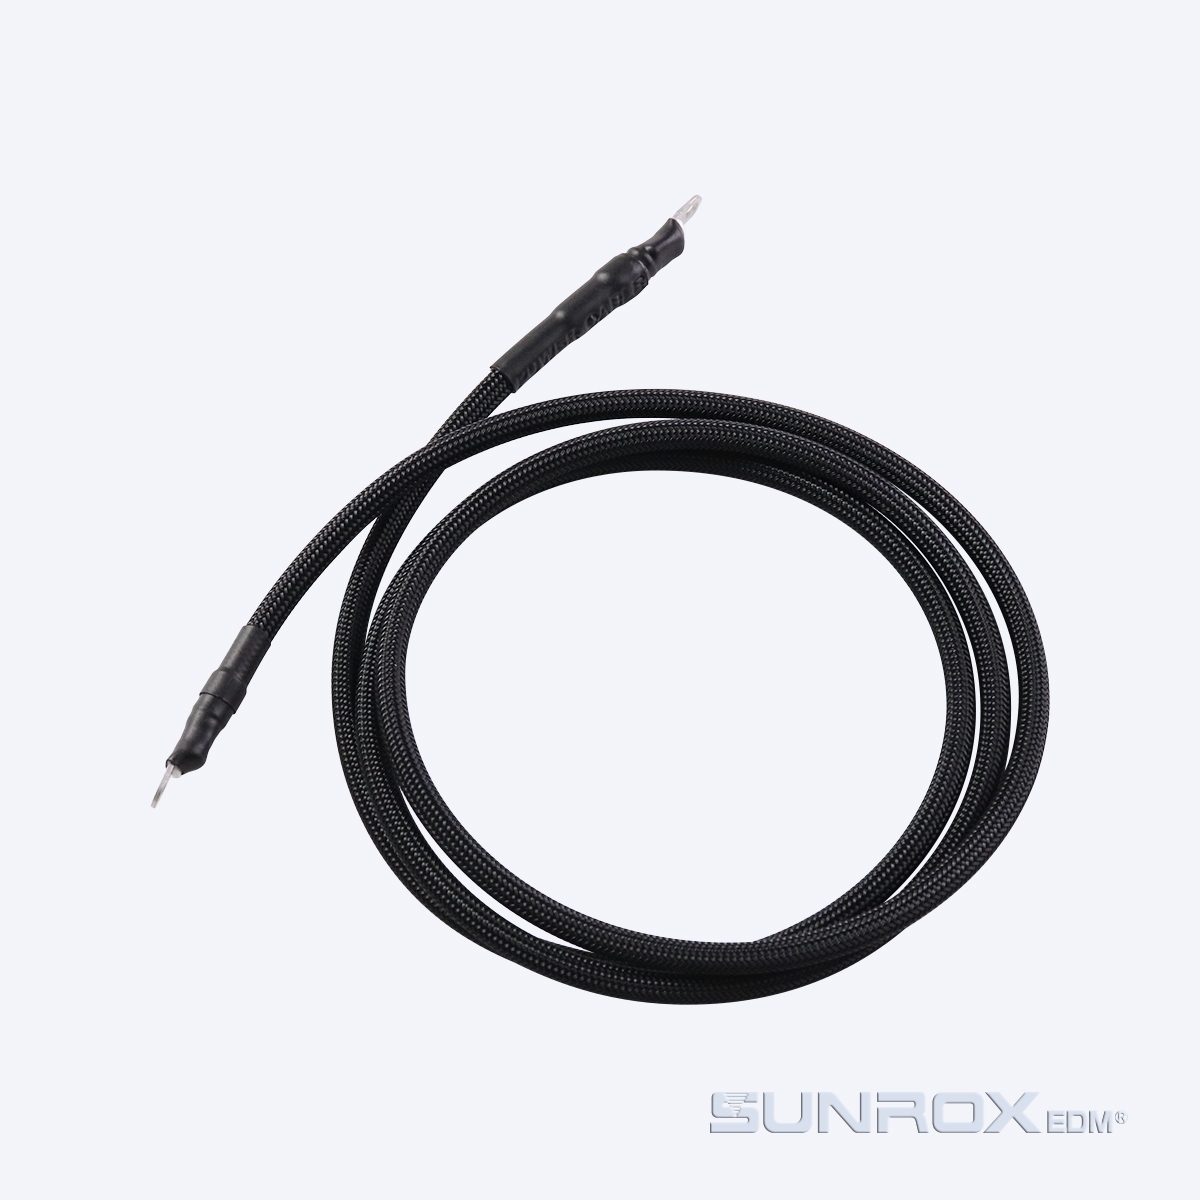 SUN-YELL INTERNATIONAL CORPORATION：SUNROX EDM for manufacturing and selling  electric discharge, wire cut, and peripheral equipment